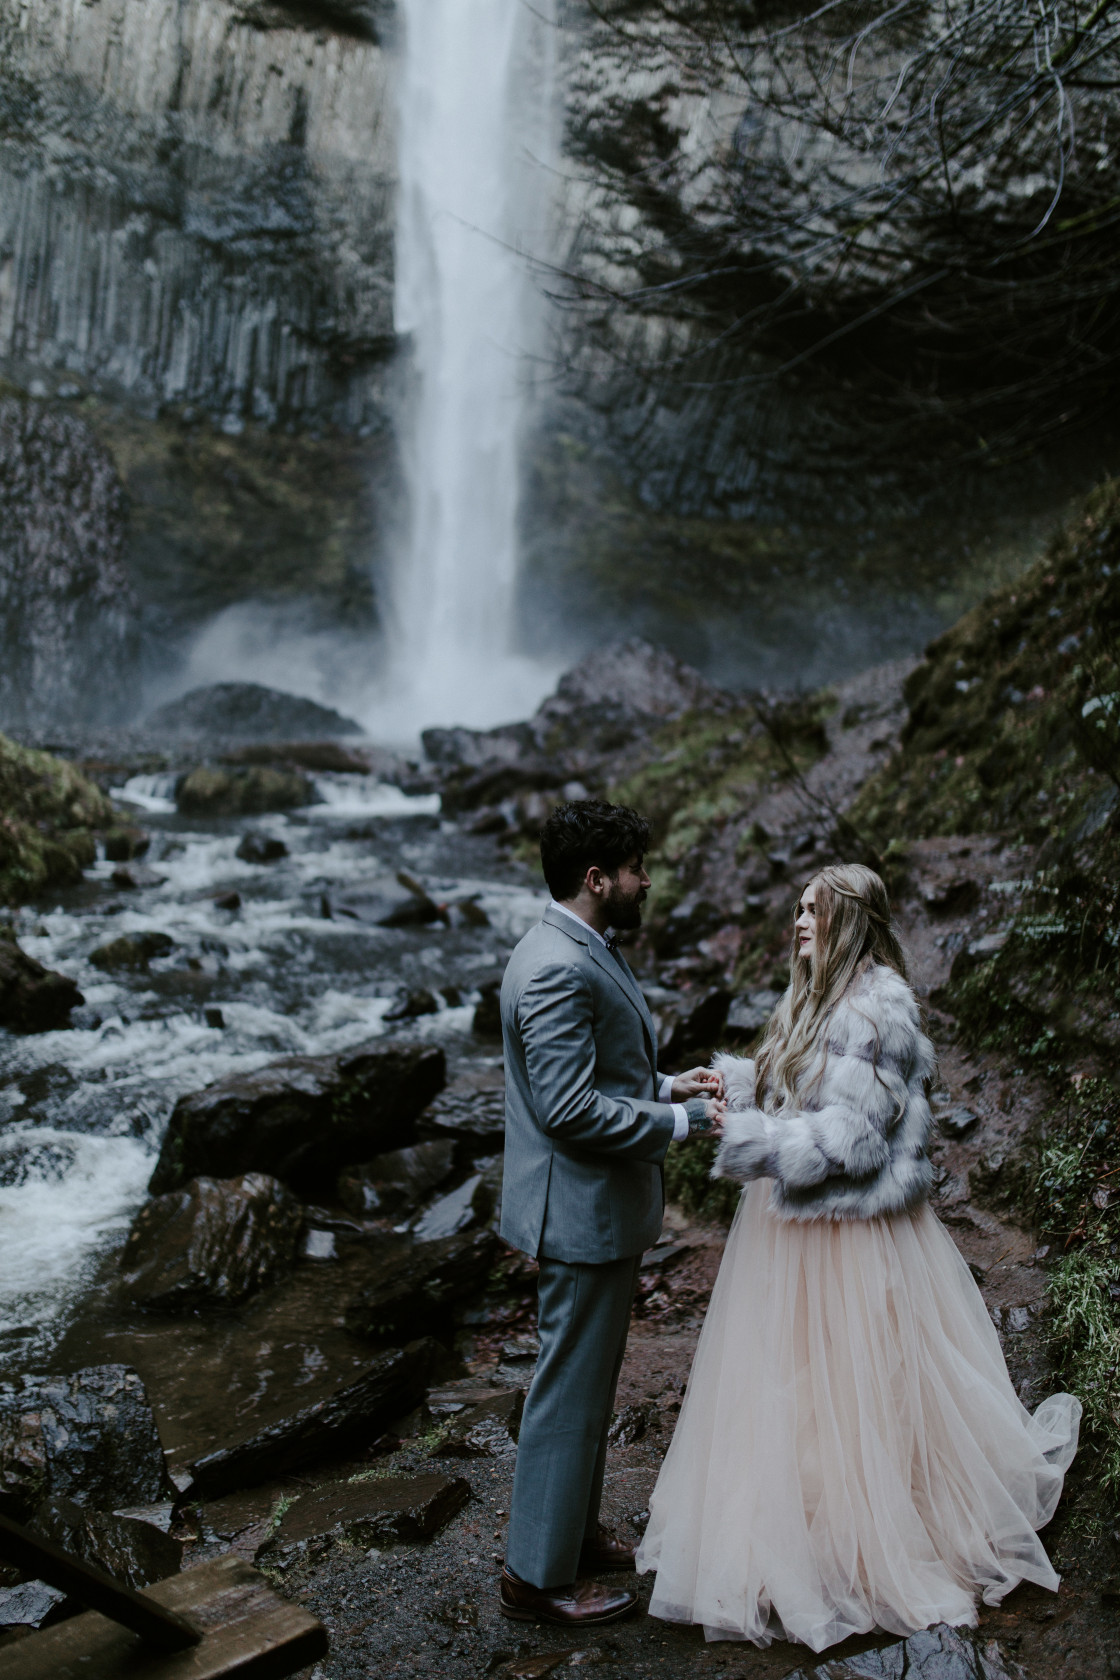 Boris and Tyanna recite vows to each other. Adventure elopement in the Columbia River Gorge by Sienna Plus Josh.